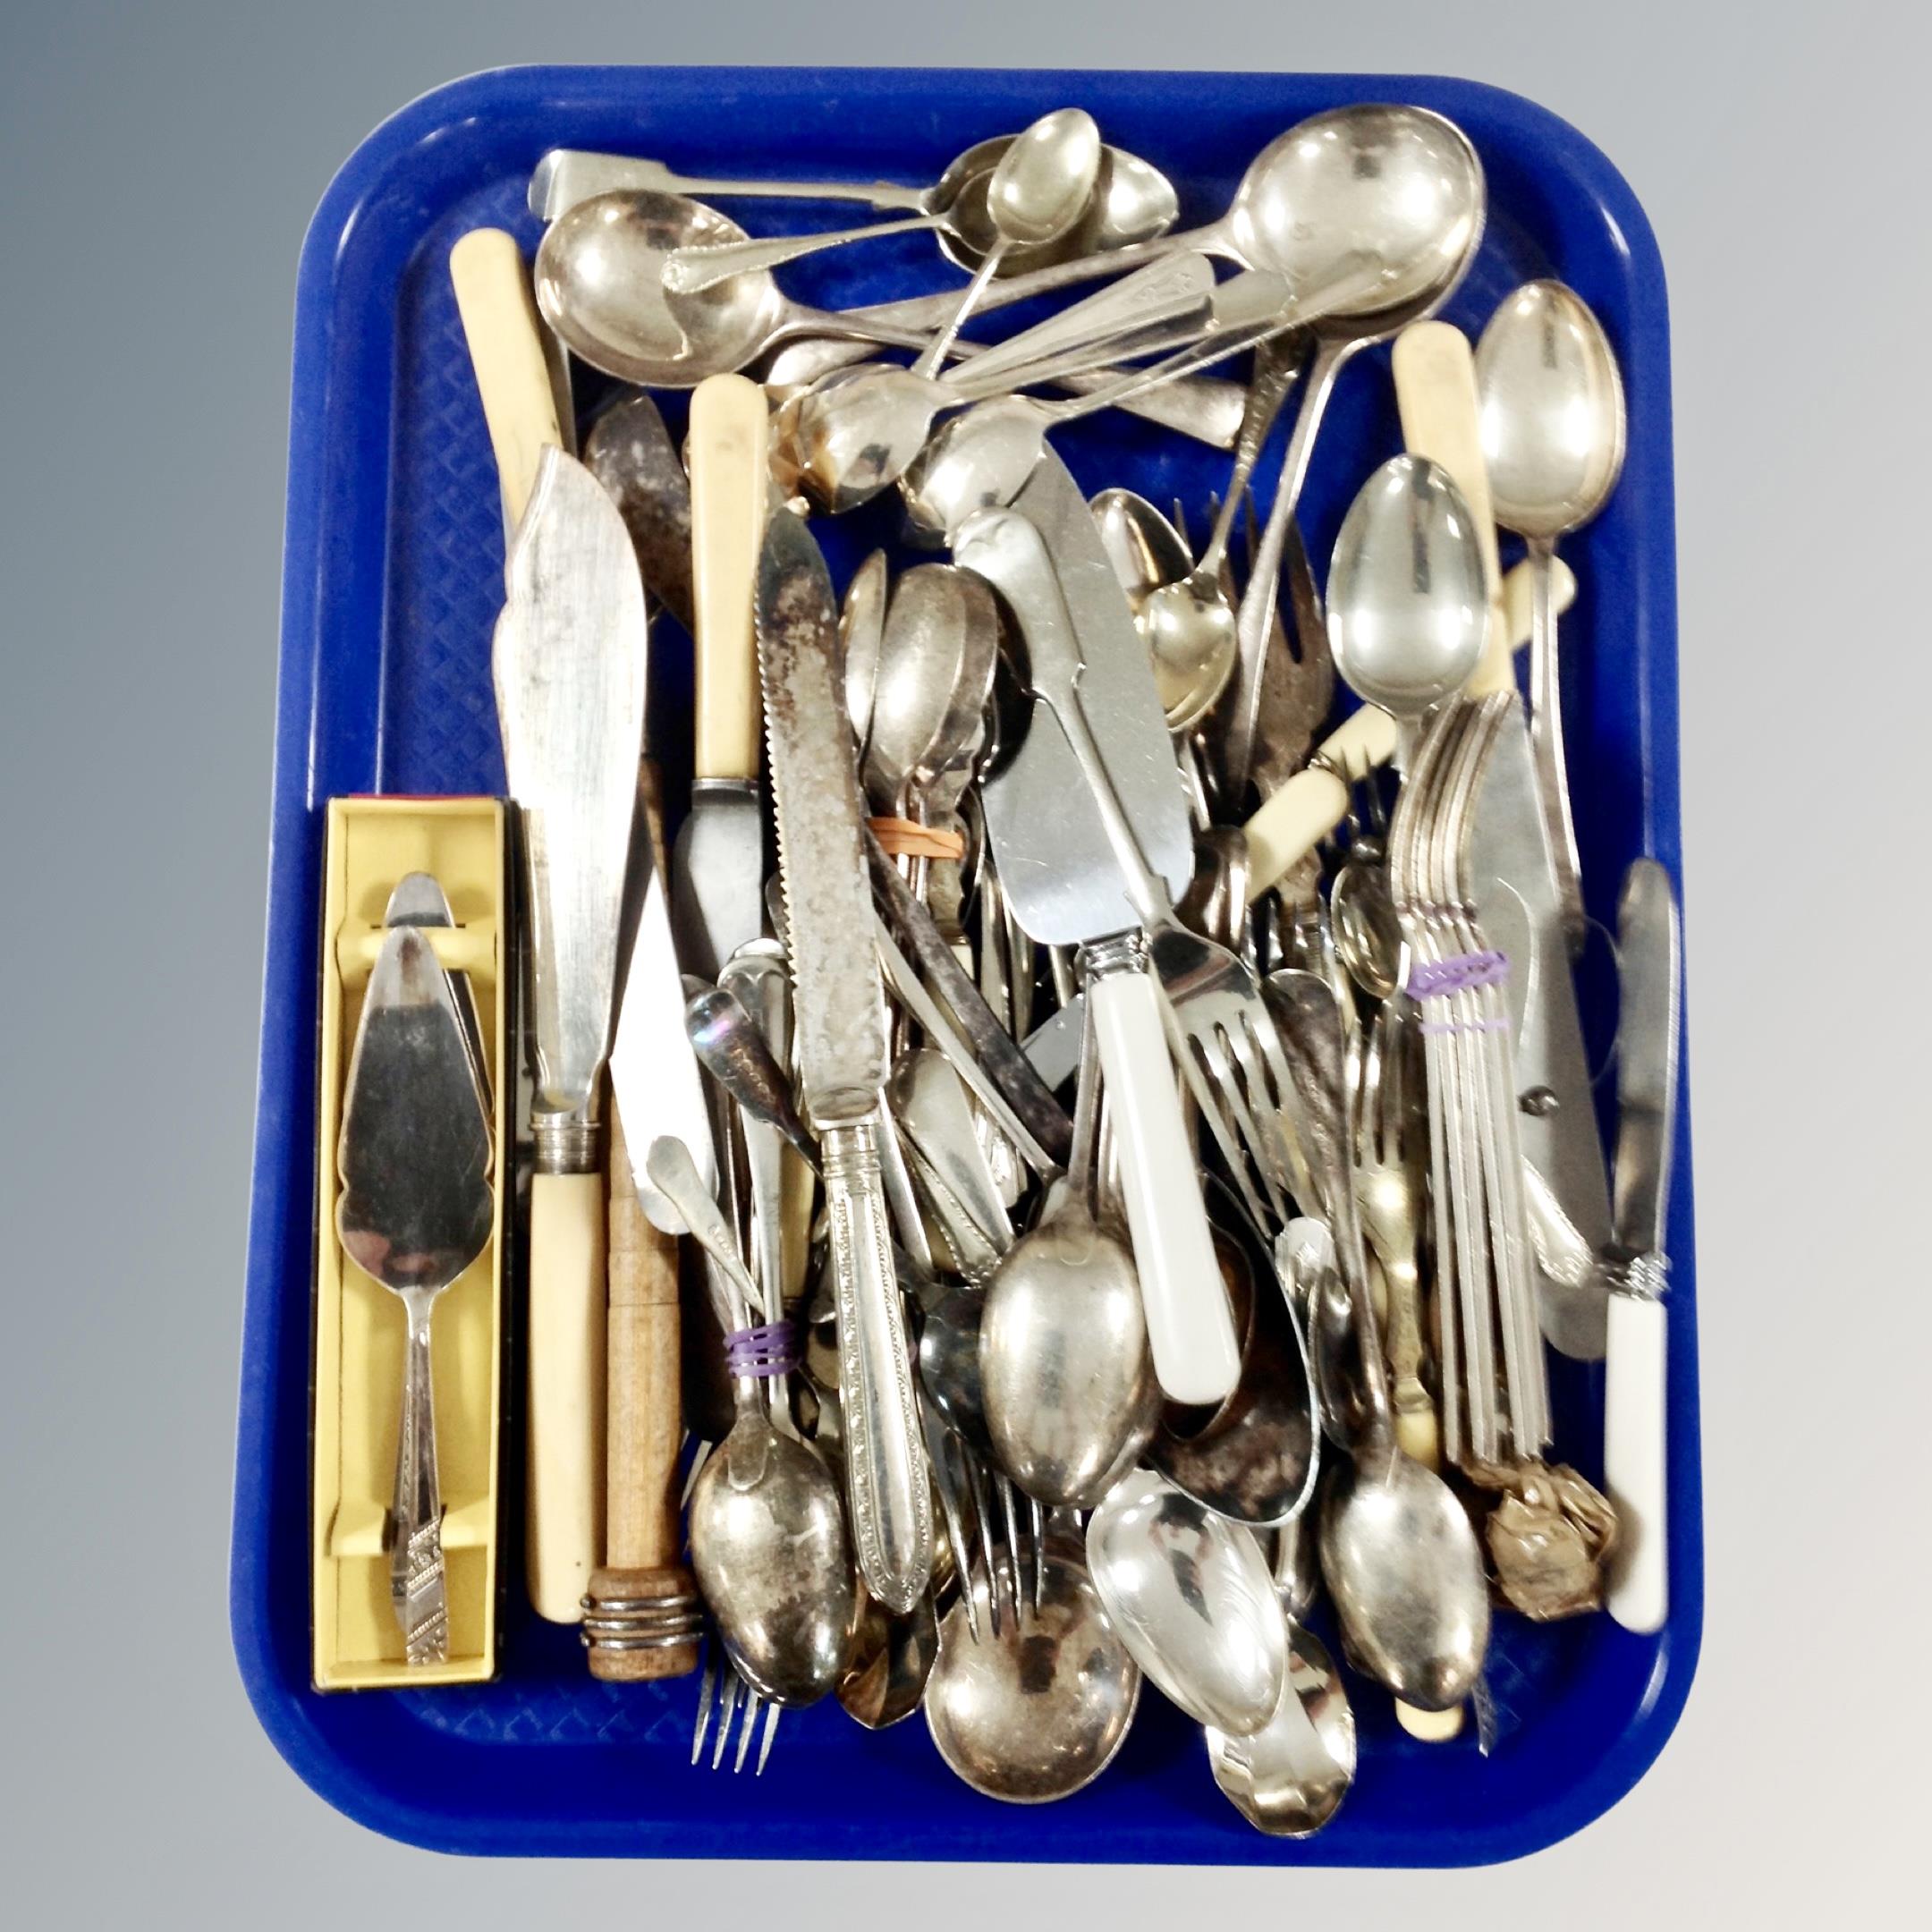 A tray of assorted plated and stainless steel cutlery.